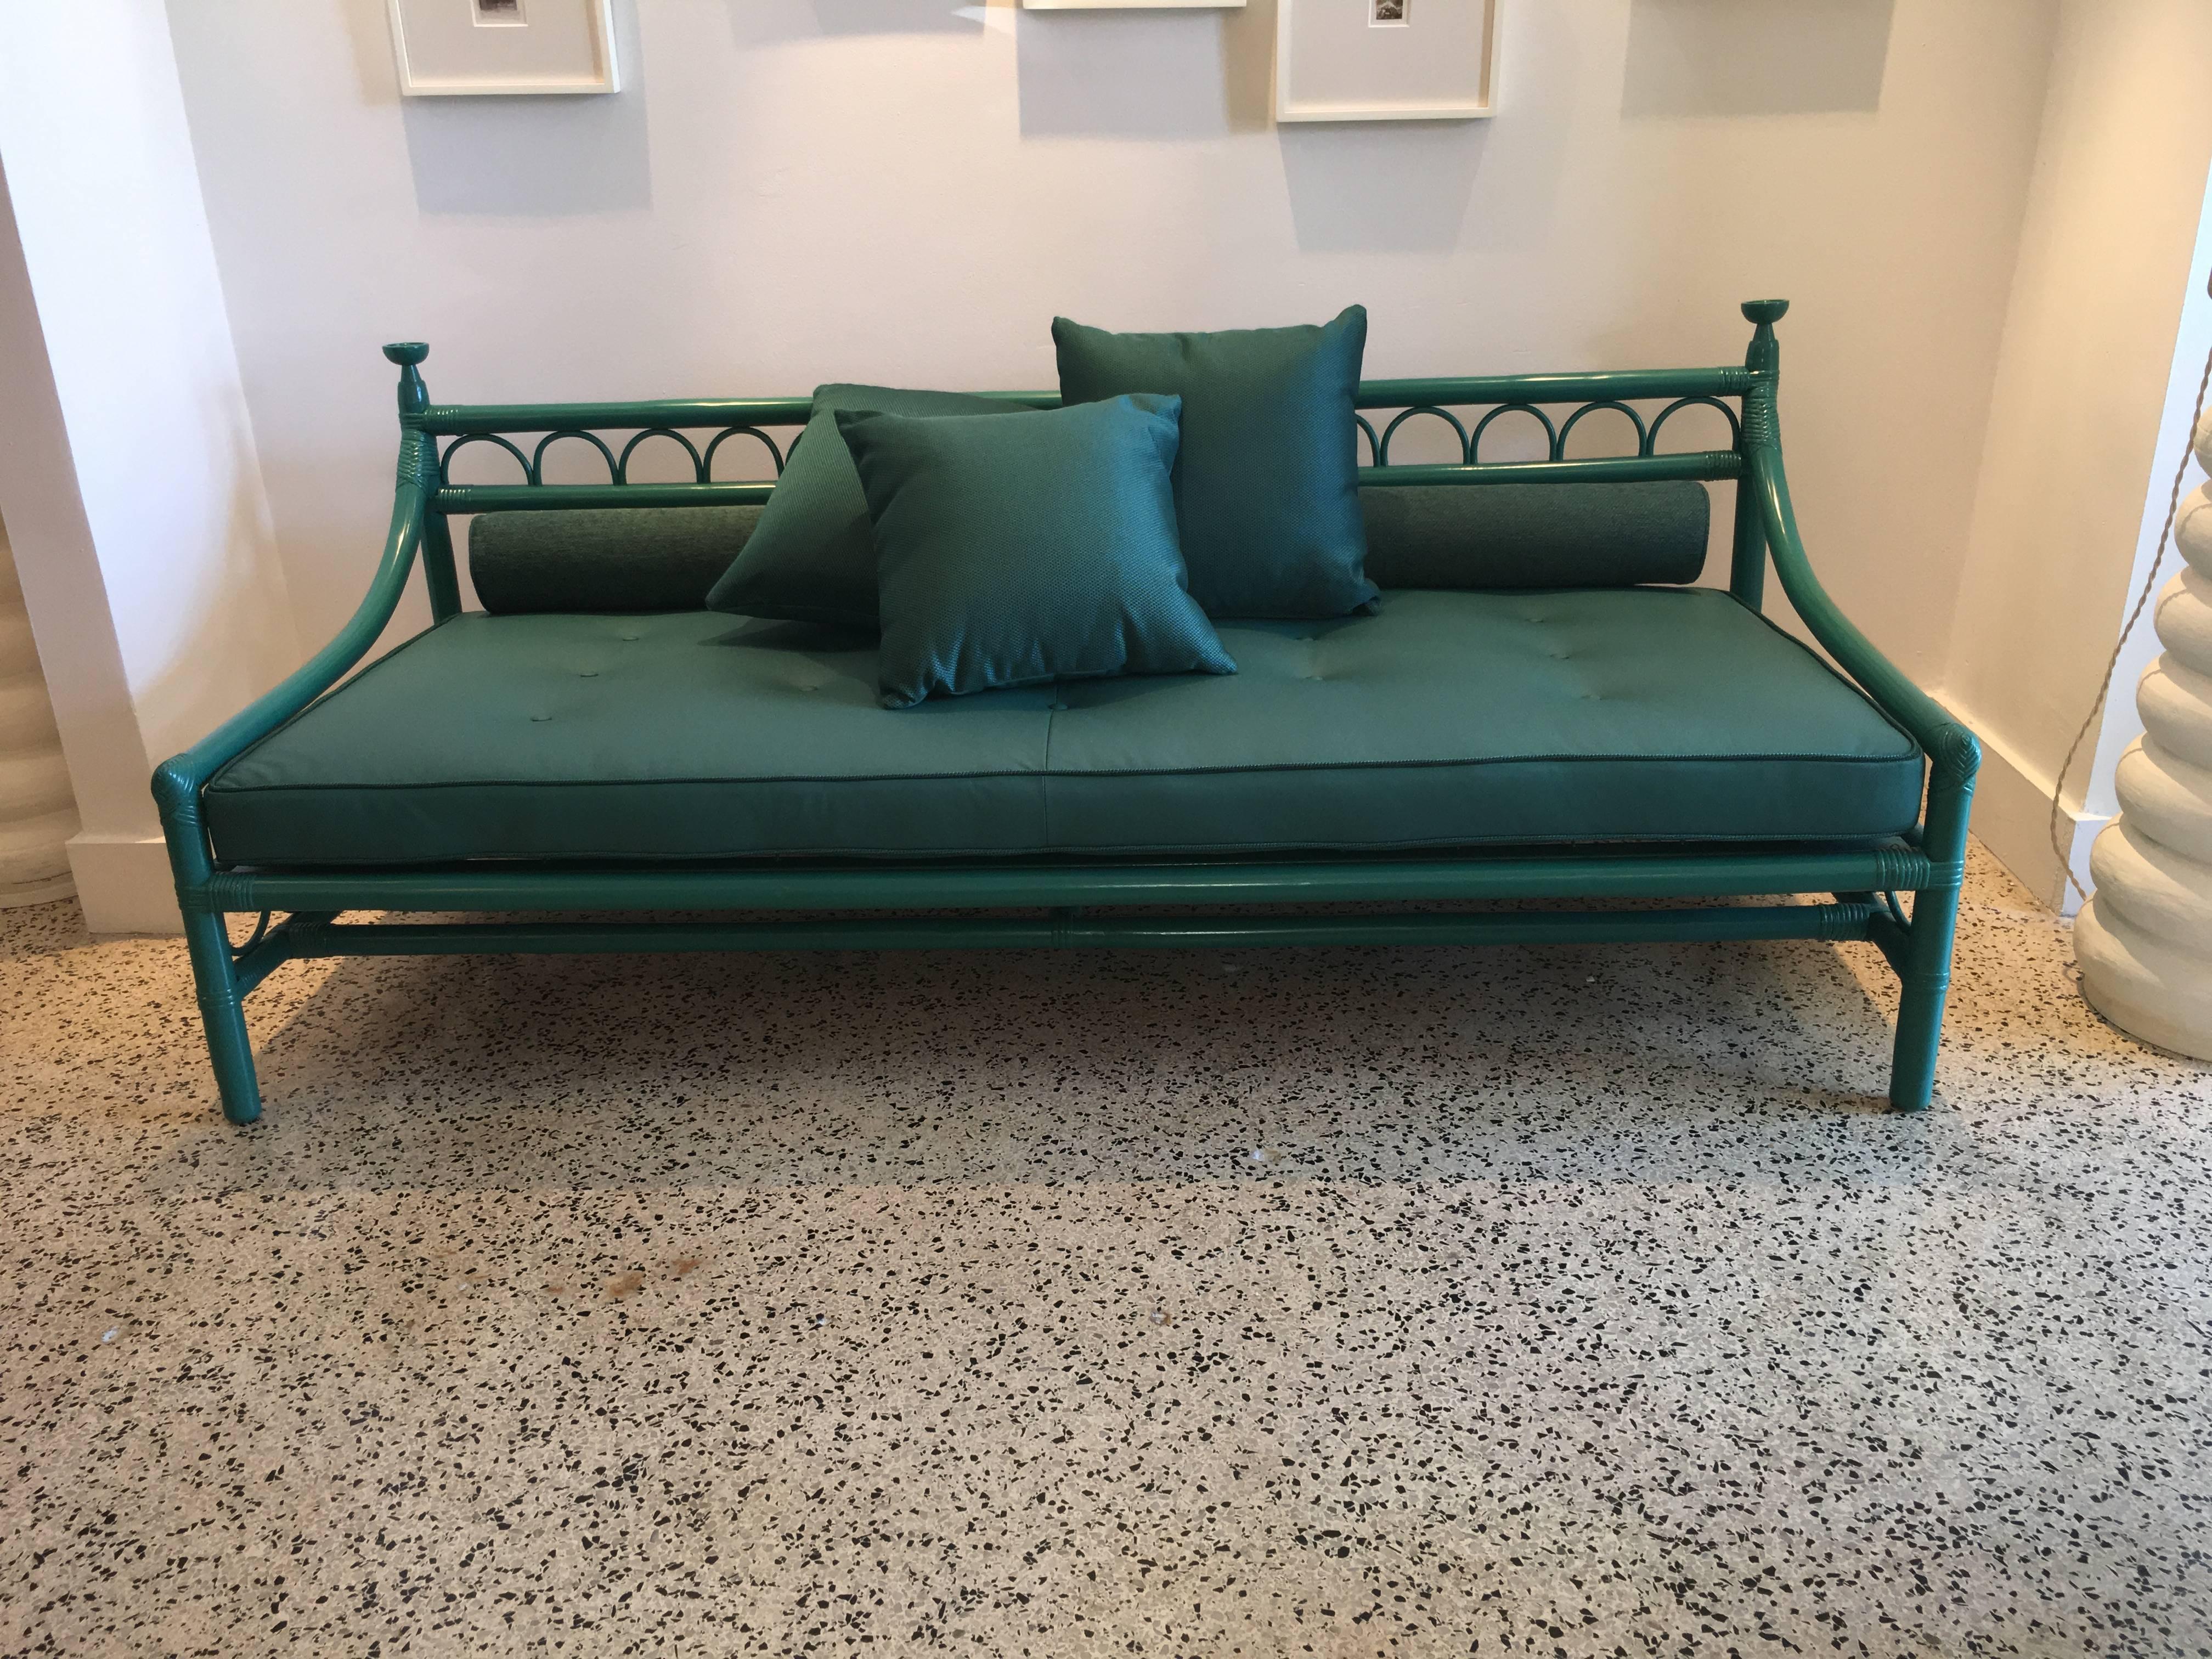 Henry Olko for Willow & Reed, this early production sofa is lacquered in the same green as the leather upholstery. Additional pillows in leather as shown in detail images are included.

Note: there is a matching armchair and side table available for